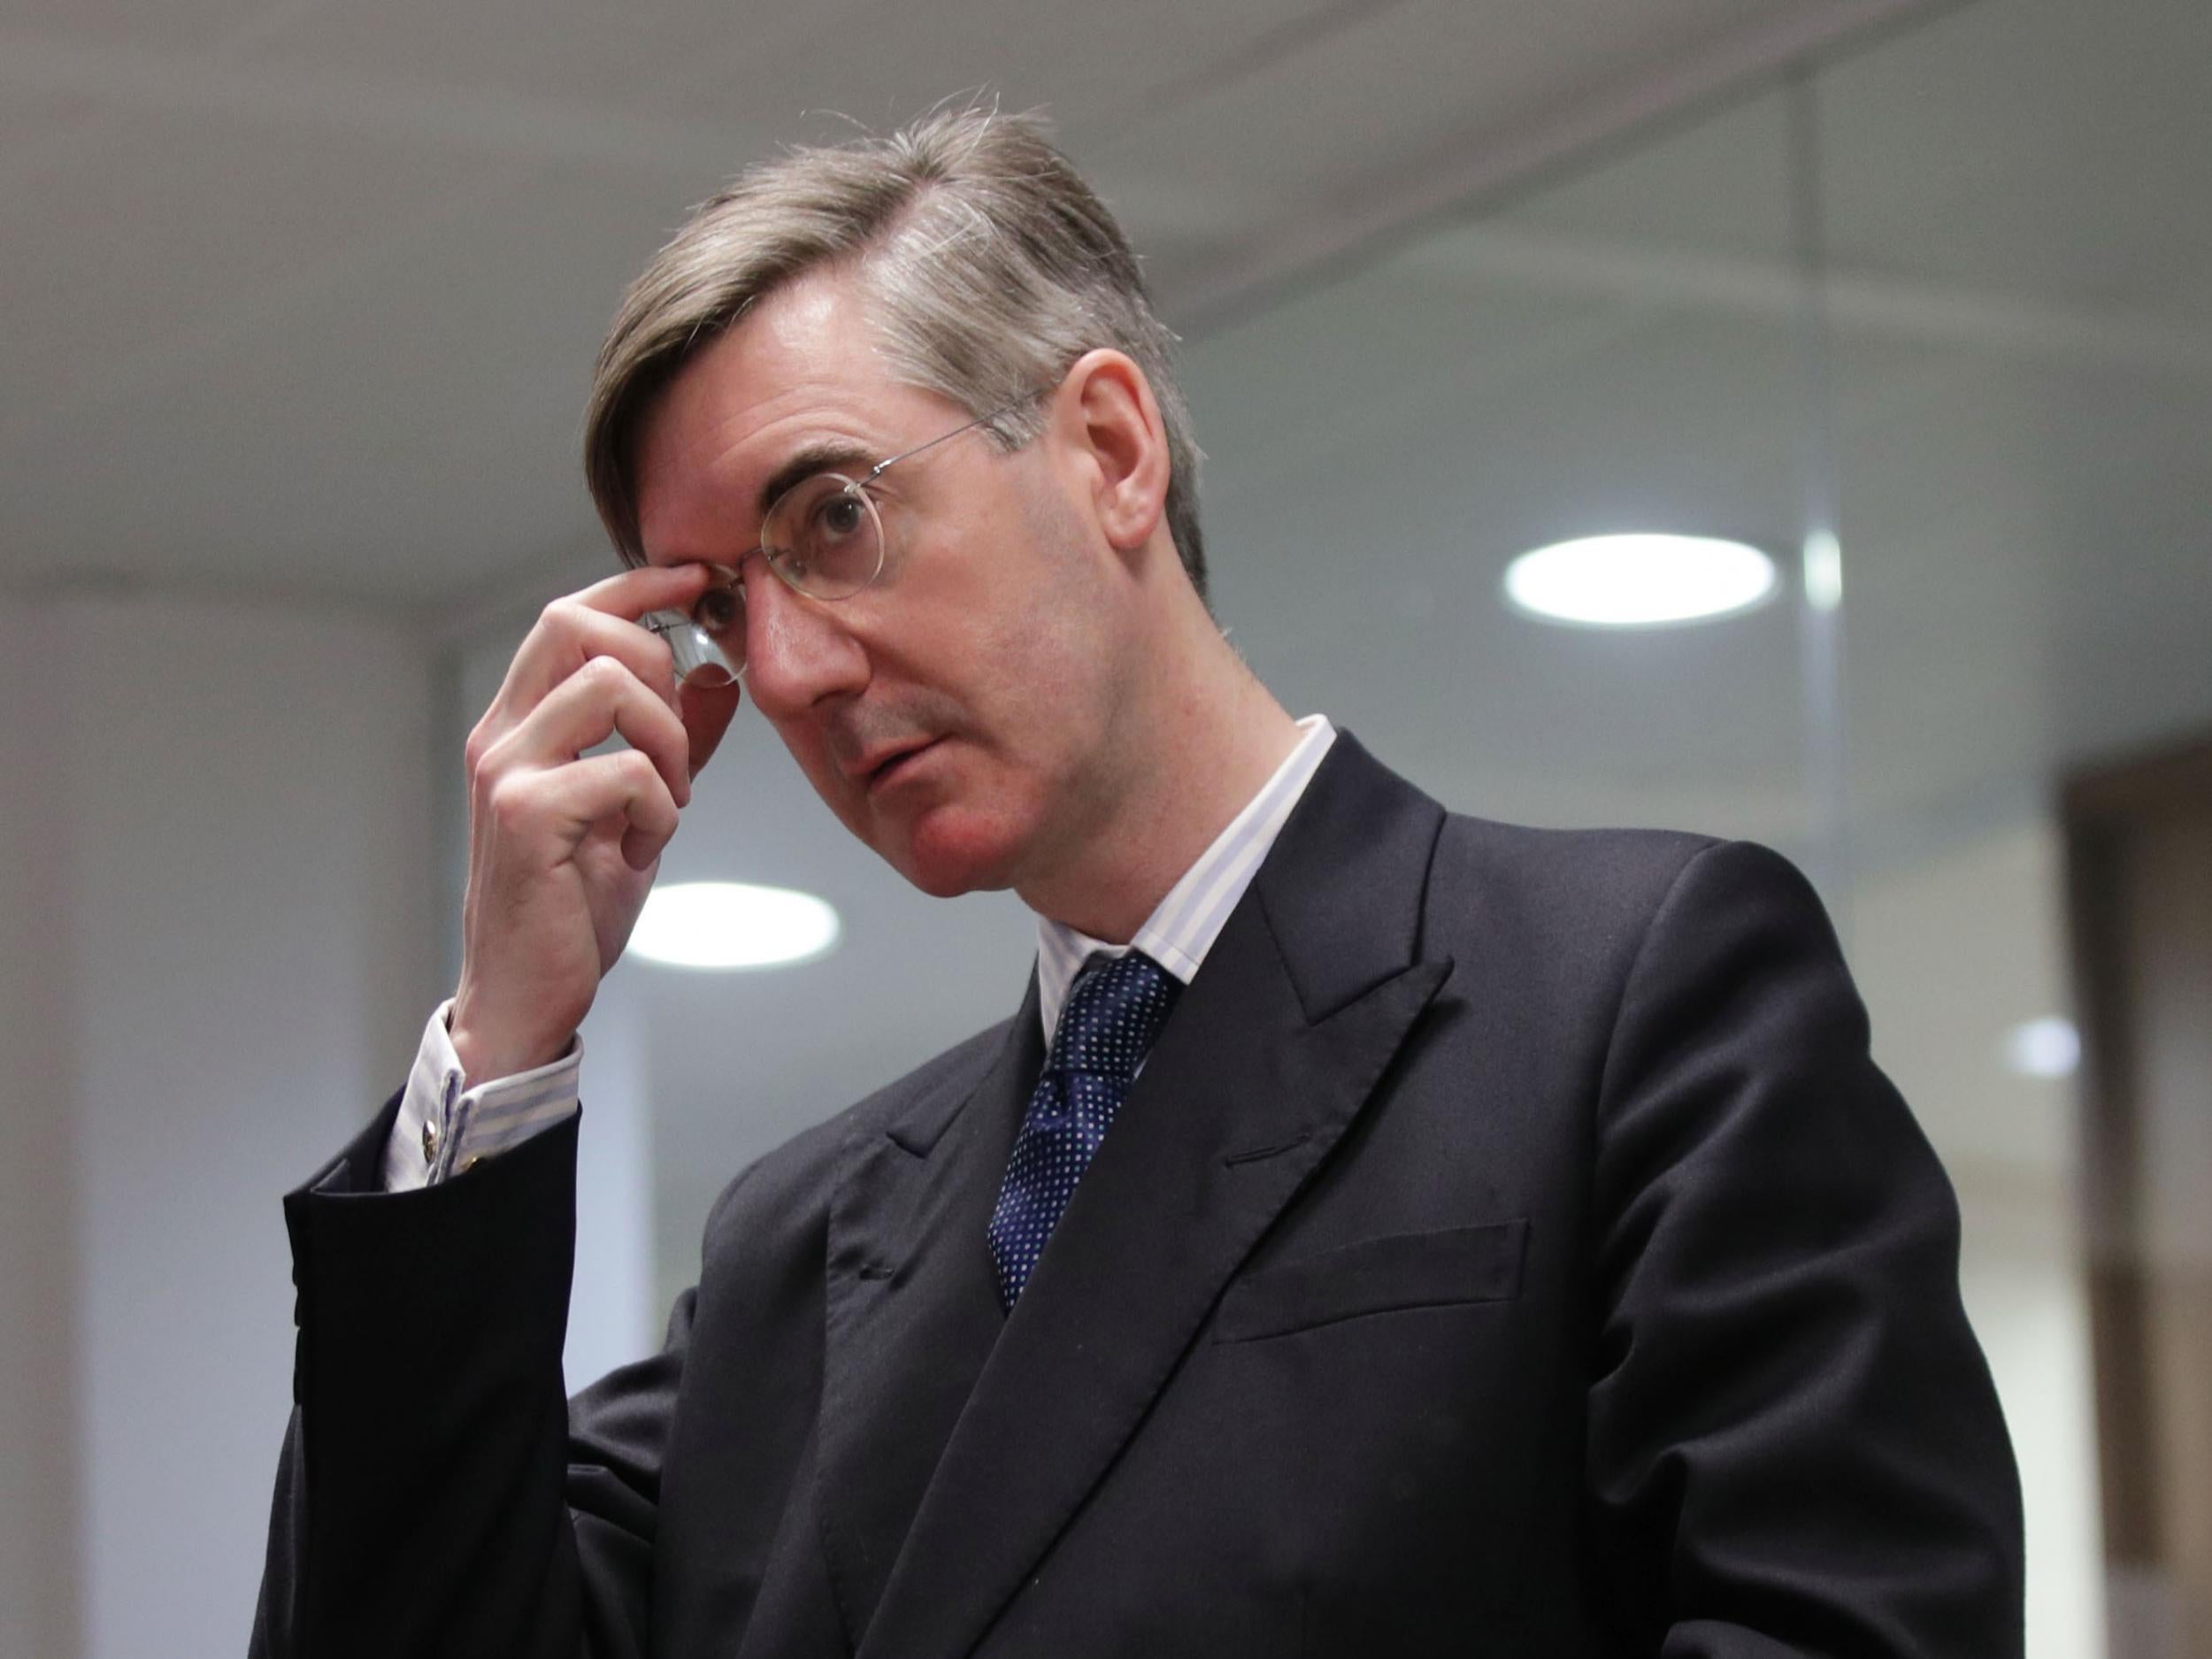 Mr Rees-Mogg is not happy with the Whitehall document relating to the Brexit transition period